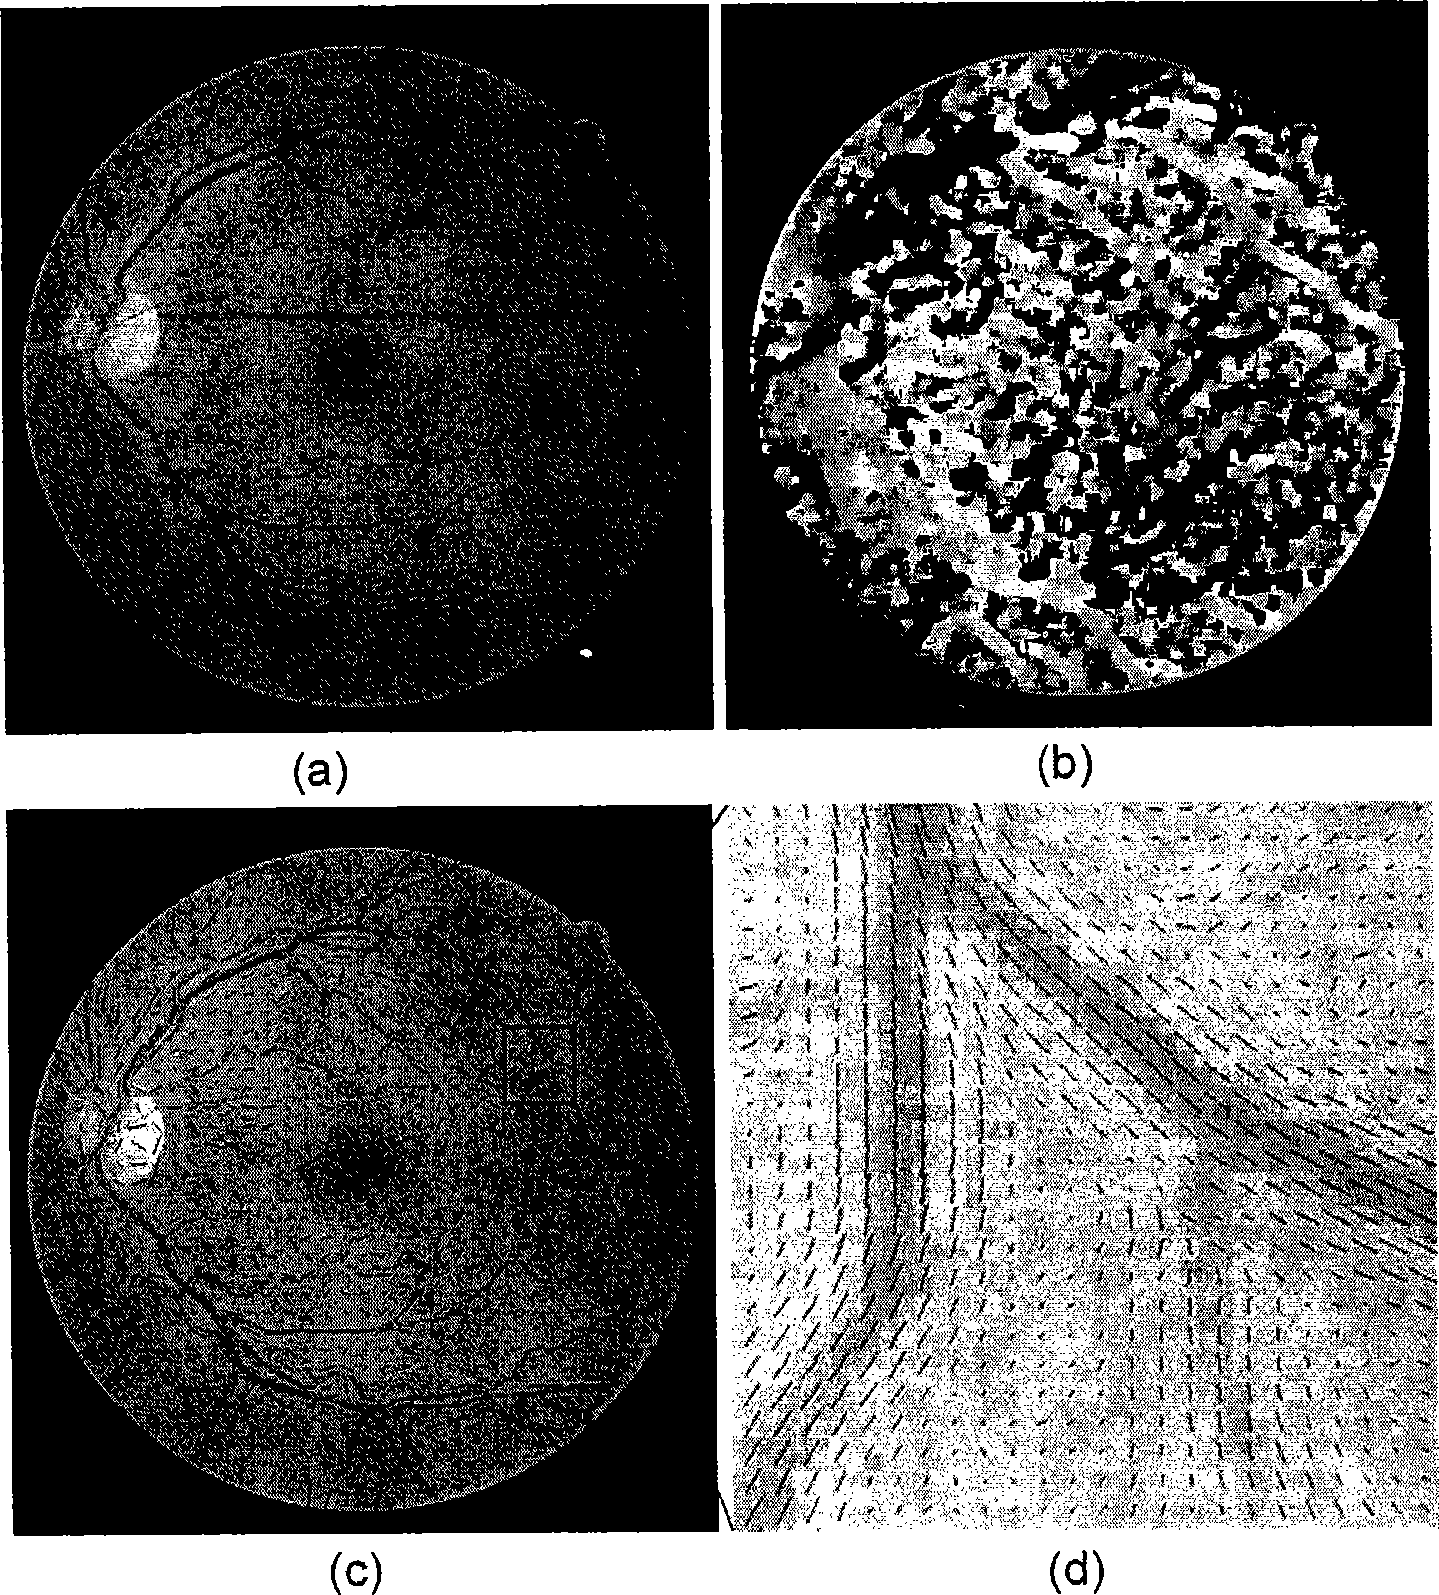 Method for enhancing blood vessels in retinal images based on the directional field